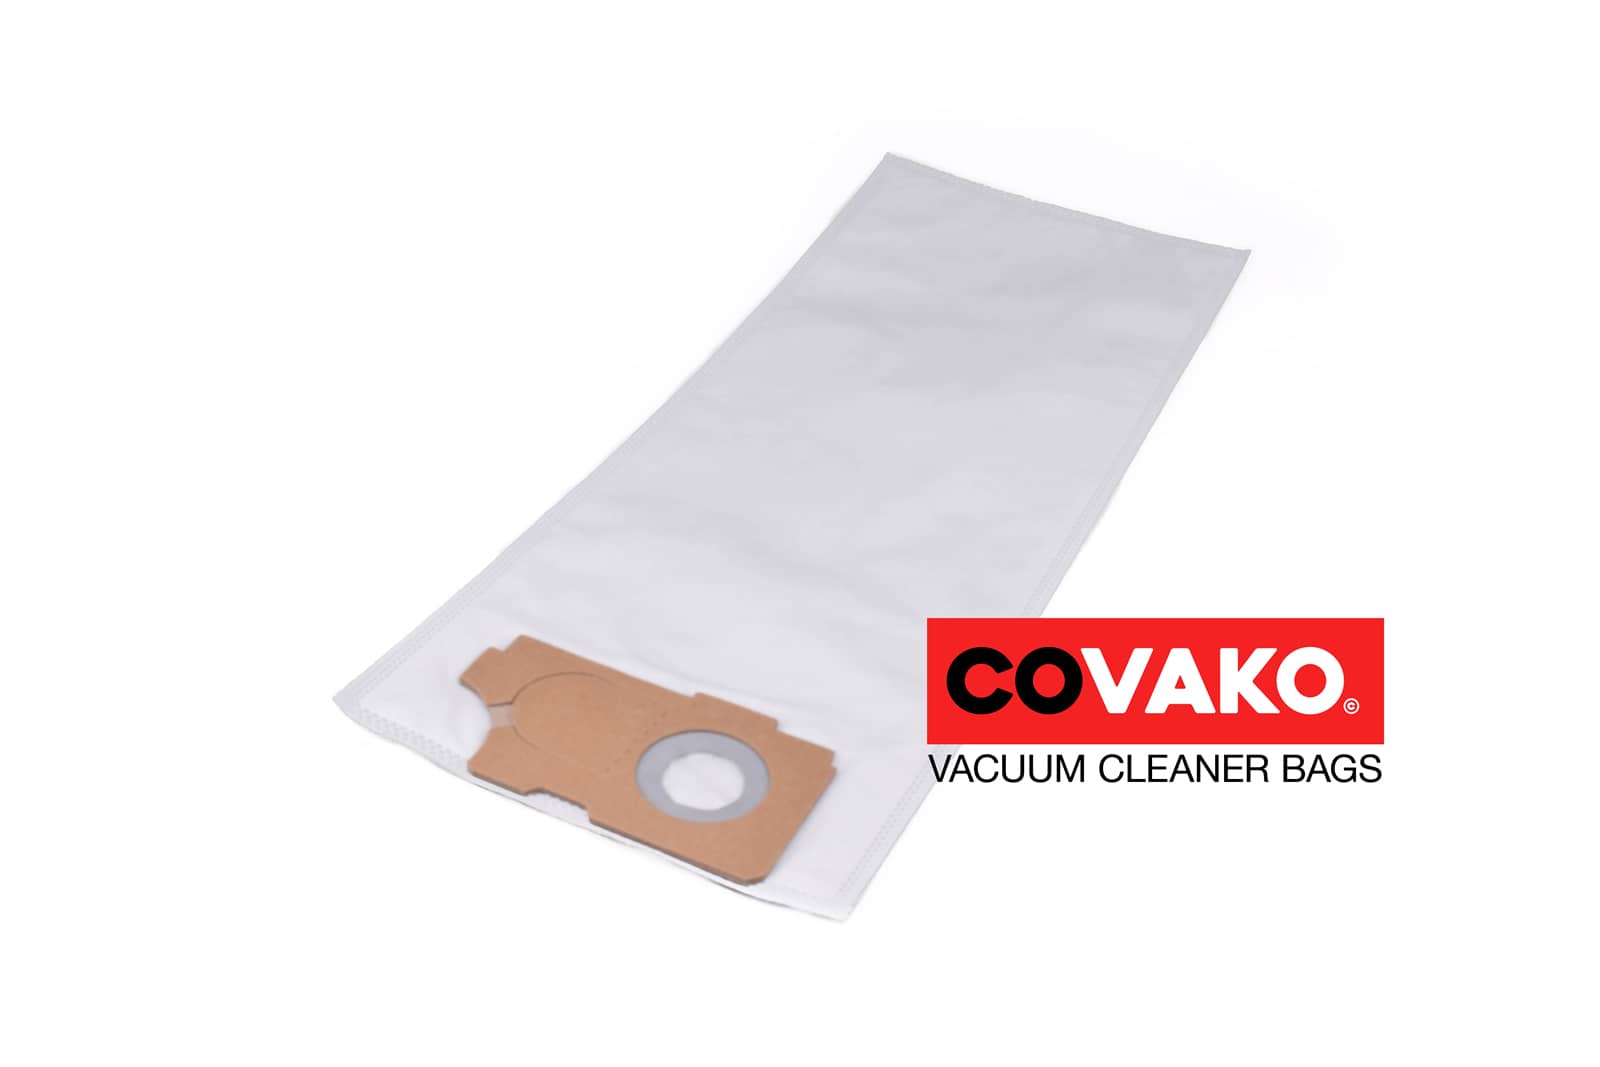 Ivac Comfort 36 / Synthesis - Ivac vacuum cleaner bags